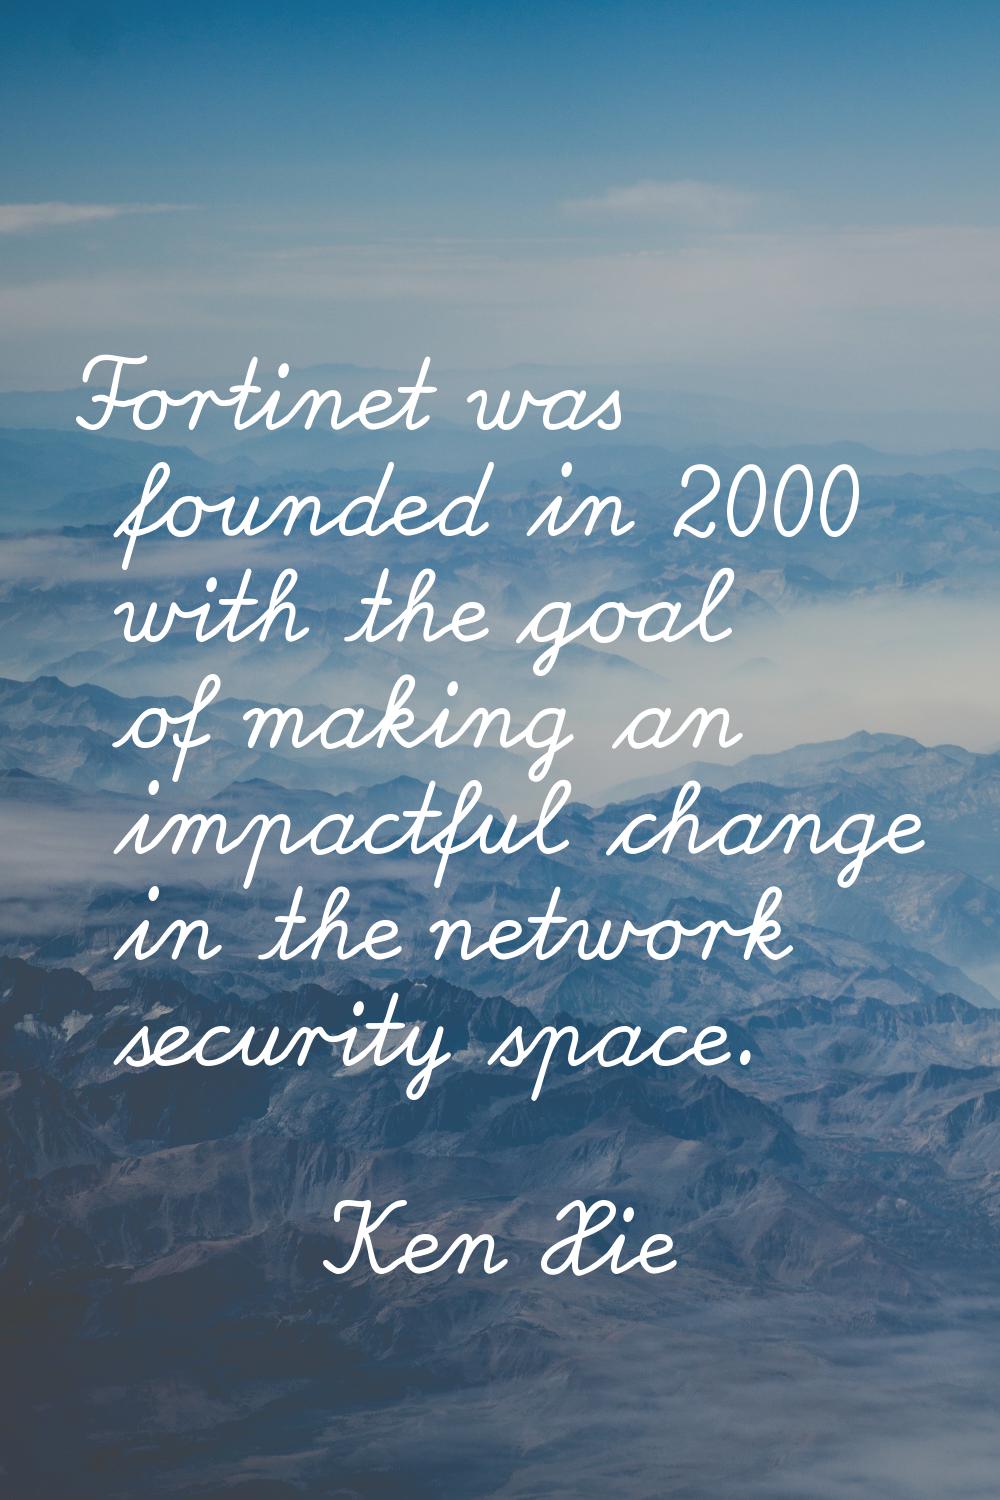 Fortinet was founded in 2000 with the goal of making an impactful change in the network security sp